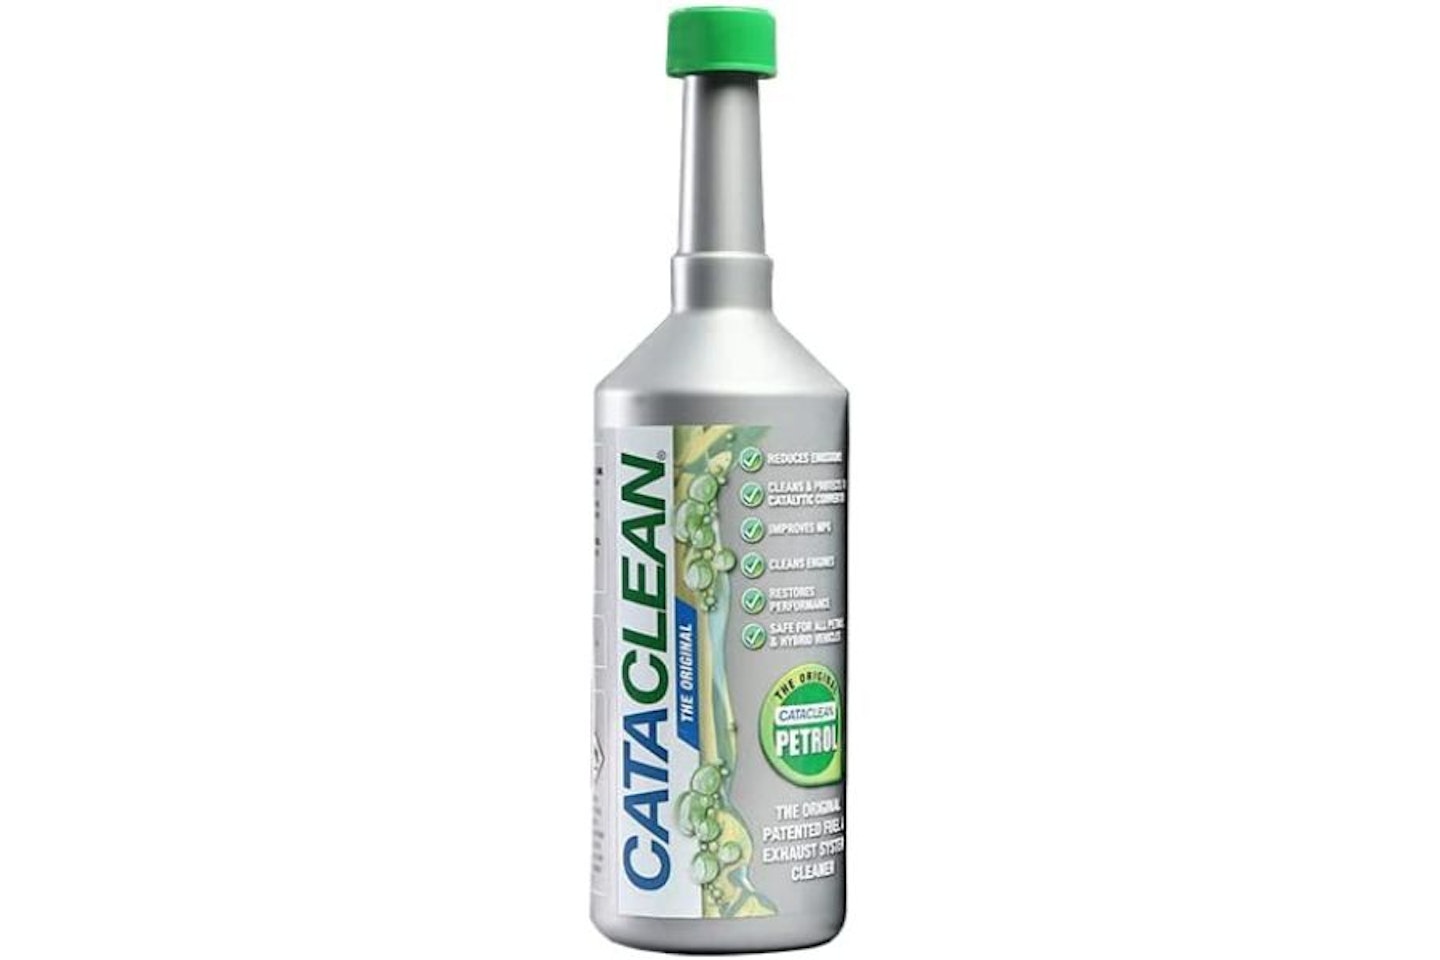 Cataclean system cleaner